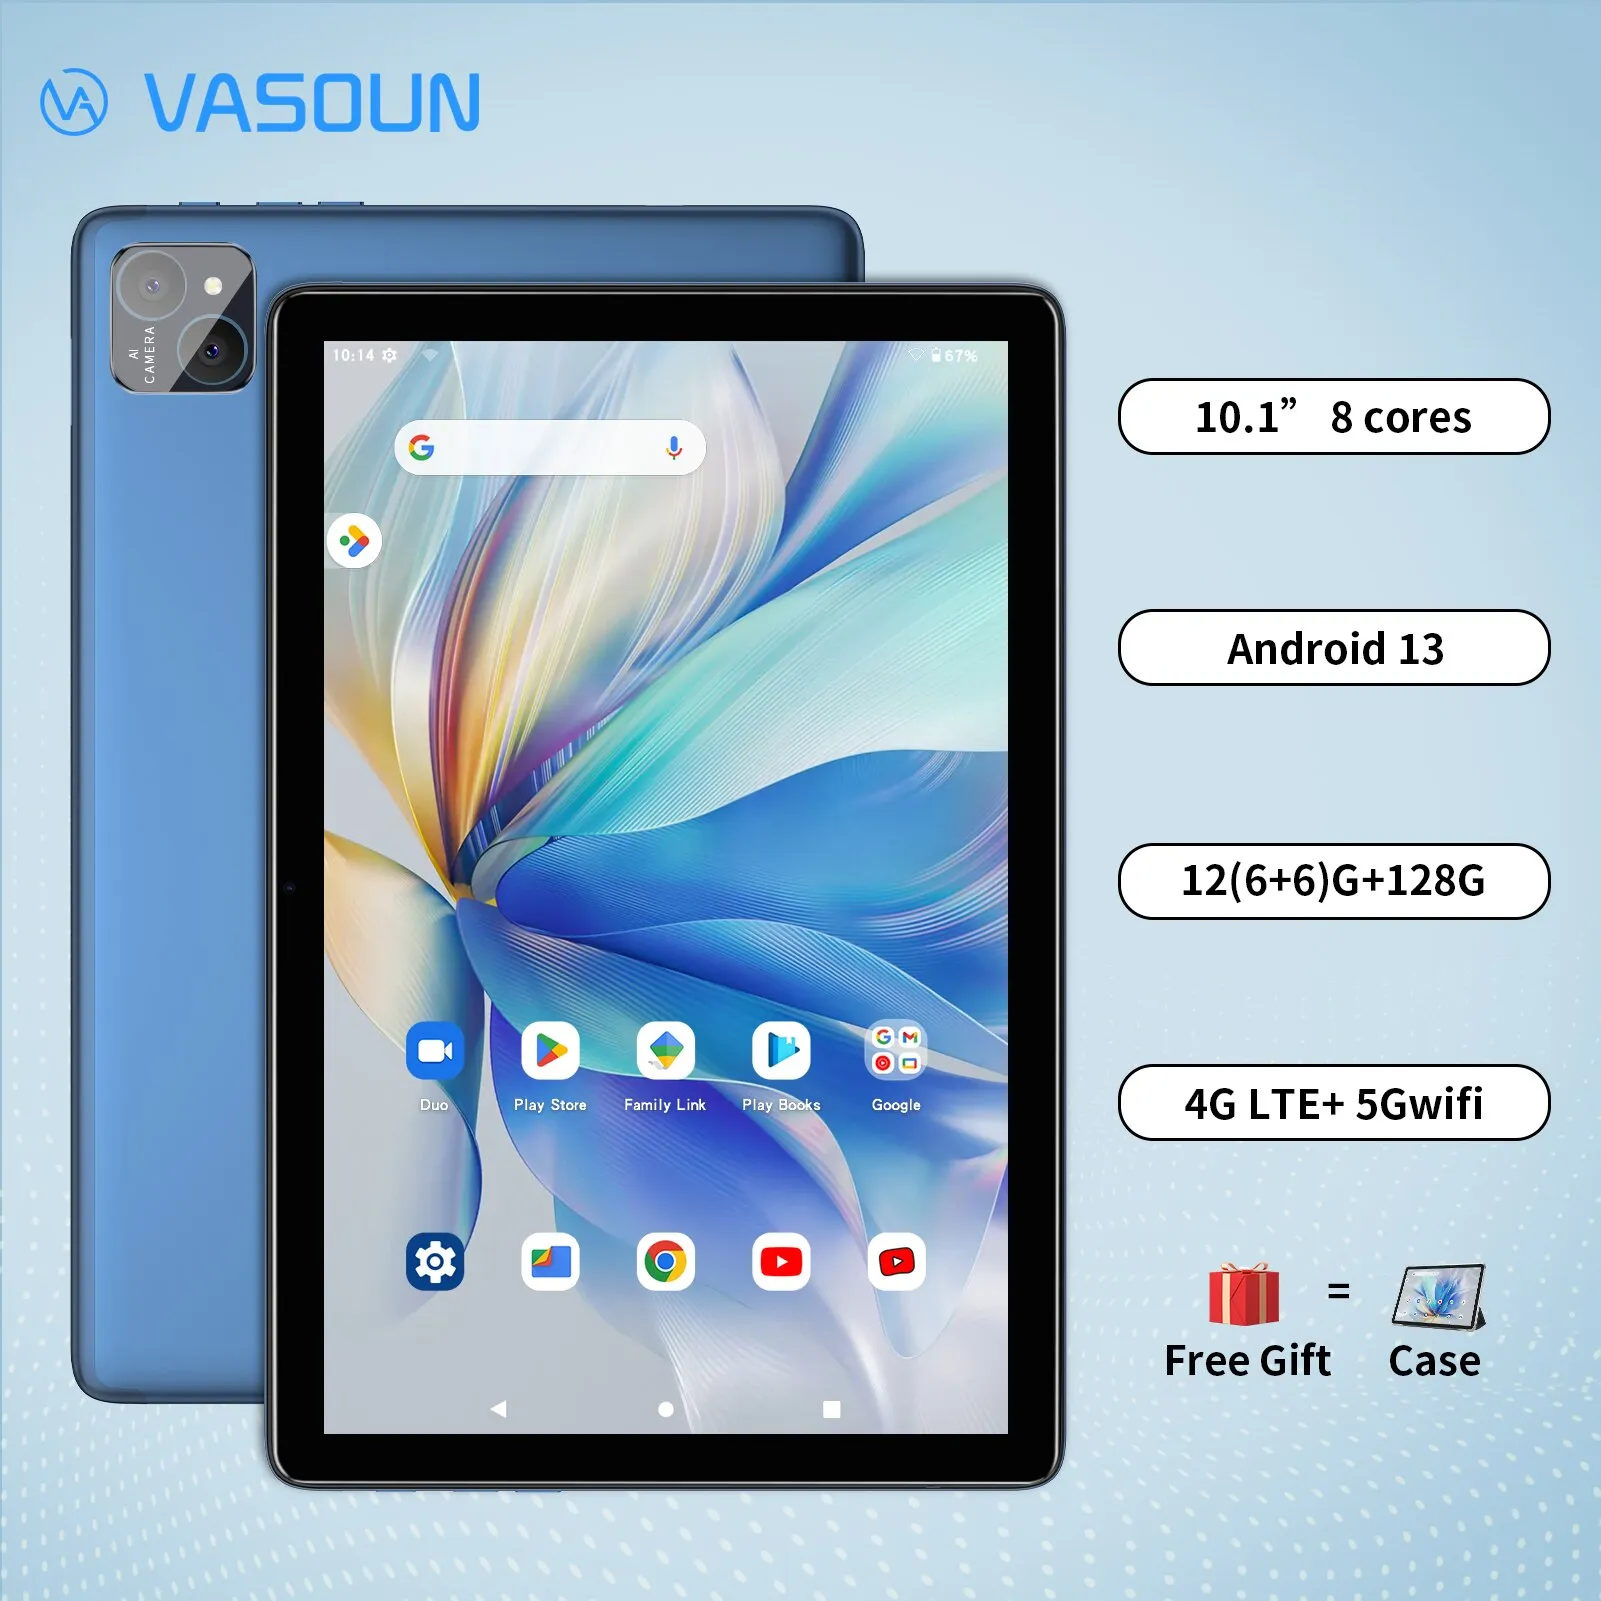 VASOUN Android 13 Tablet 10.1, 12GB(6+6 Expand) RAM, 128GB ROM, Octa Core,  Dual SIM 4G Unlocked With 2.4G/5G WiFi GPS : Gearbest